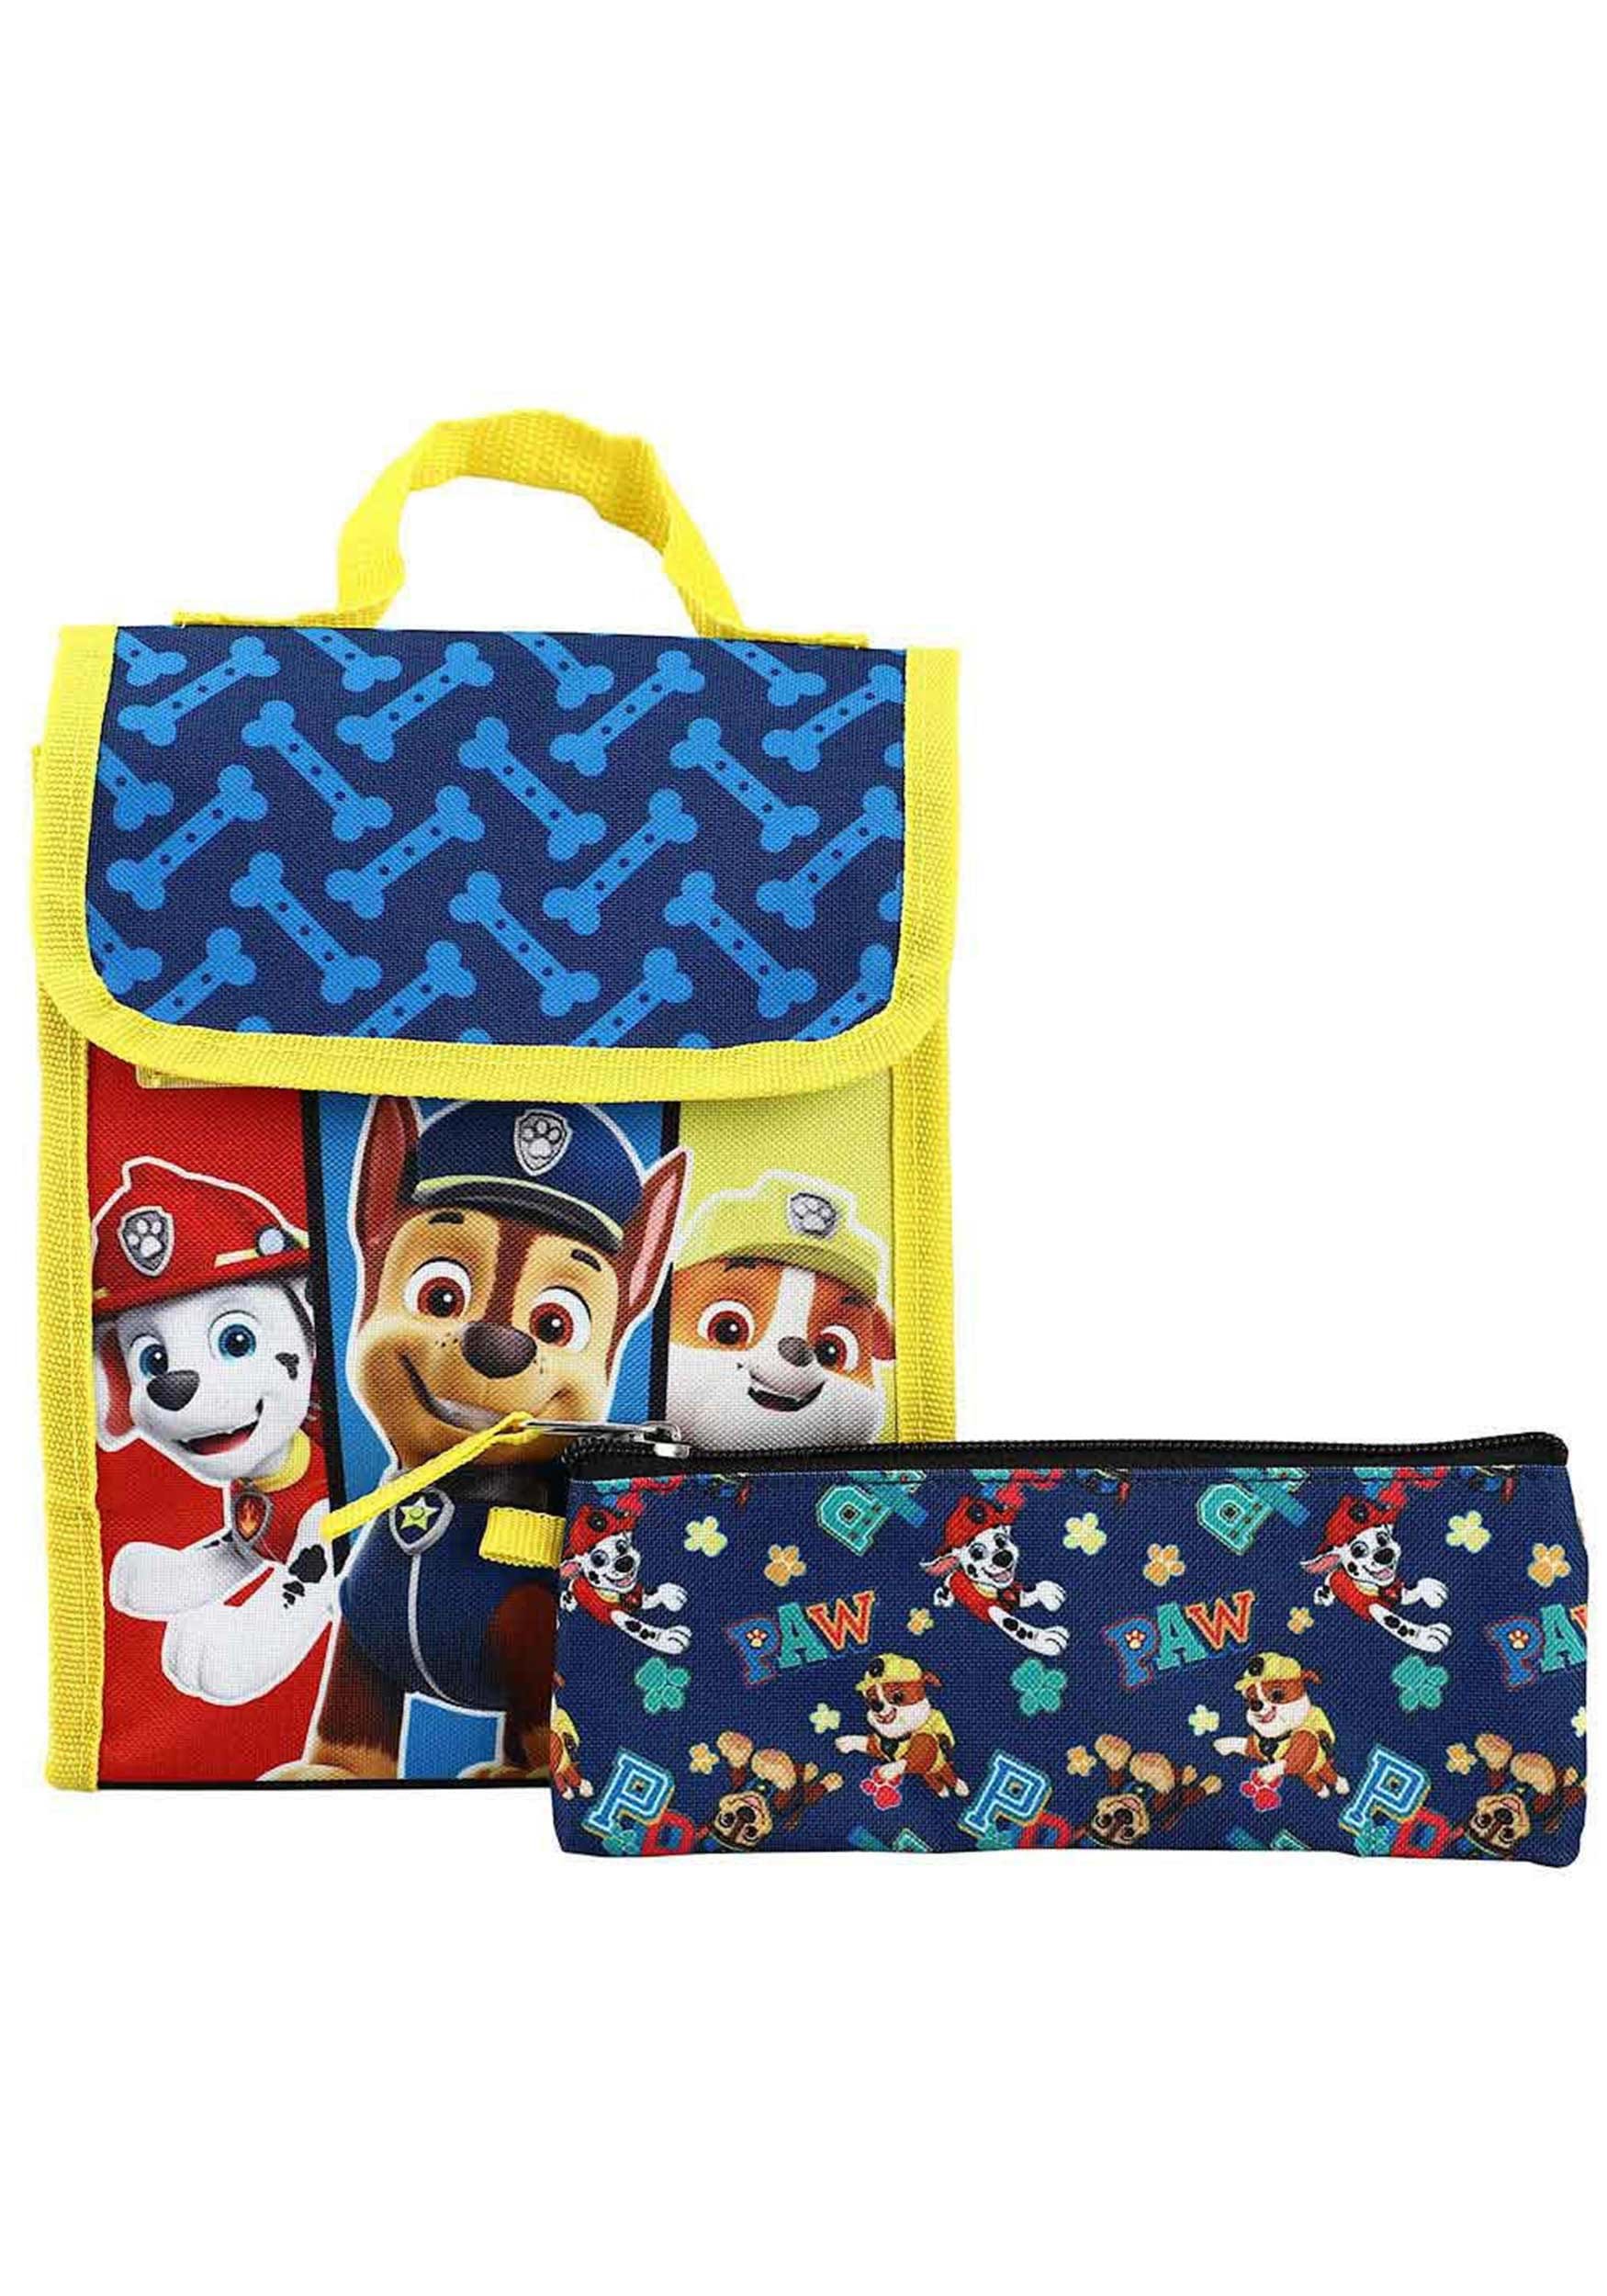 https://images.fun.com/products/89519/2-1-254826/paw-patrol-6-piece-backpack-set-alt-3.jpg